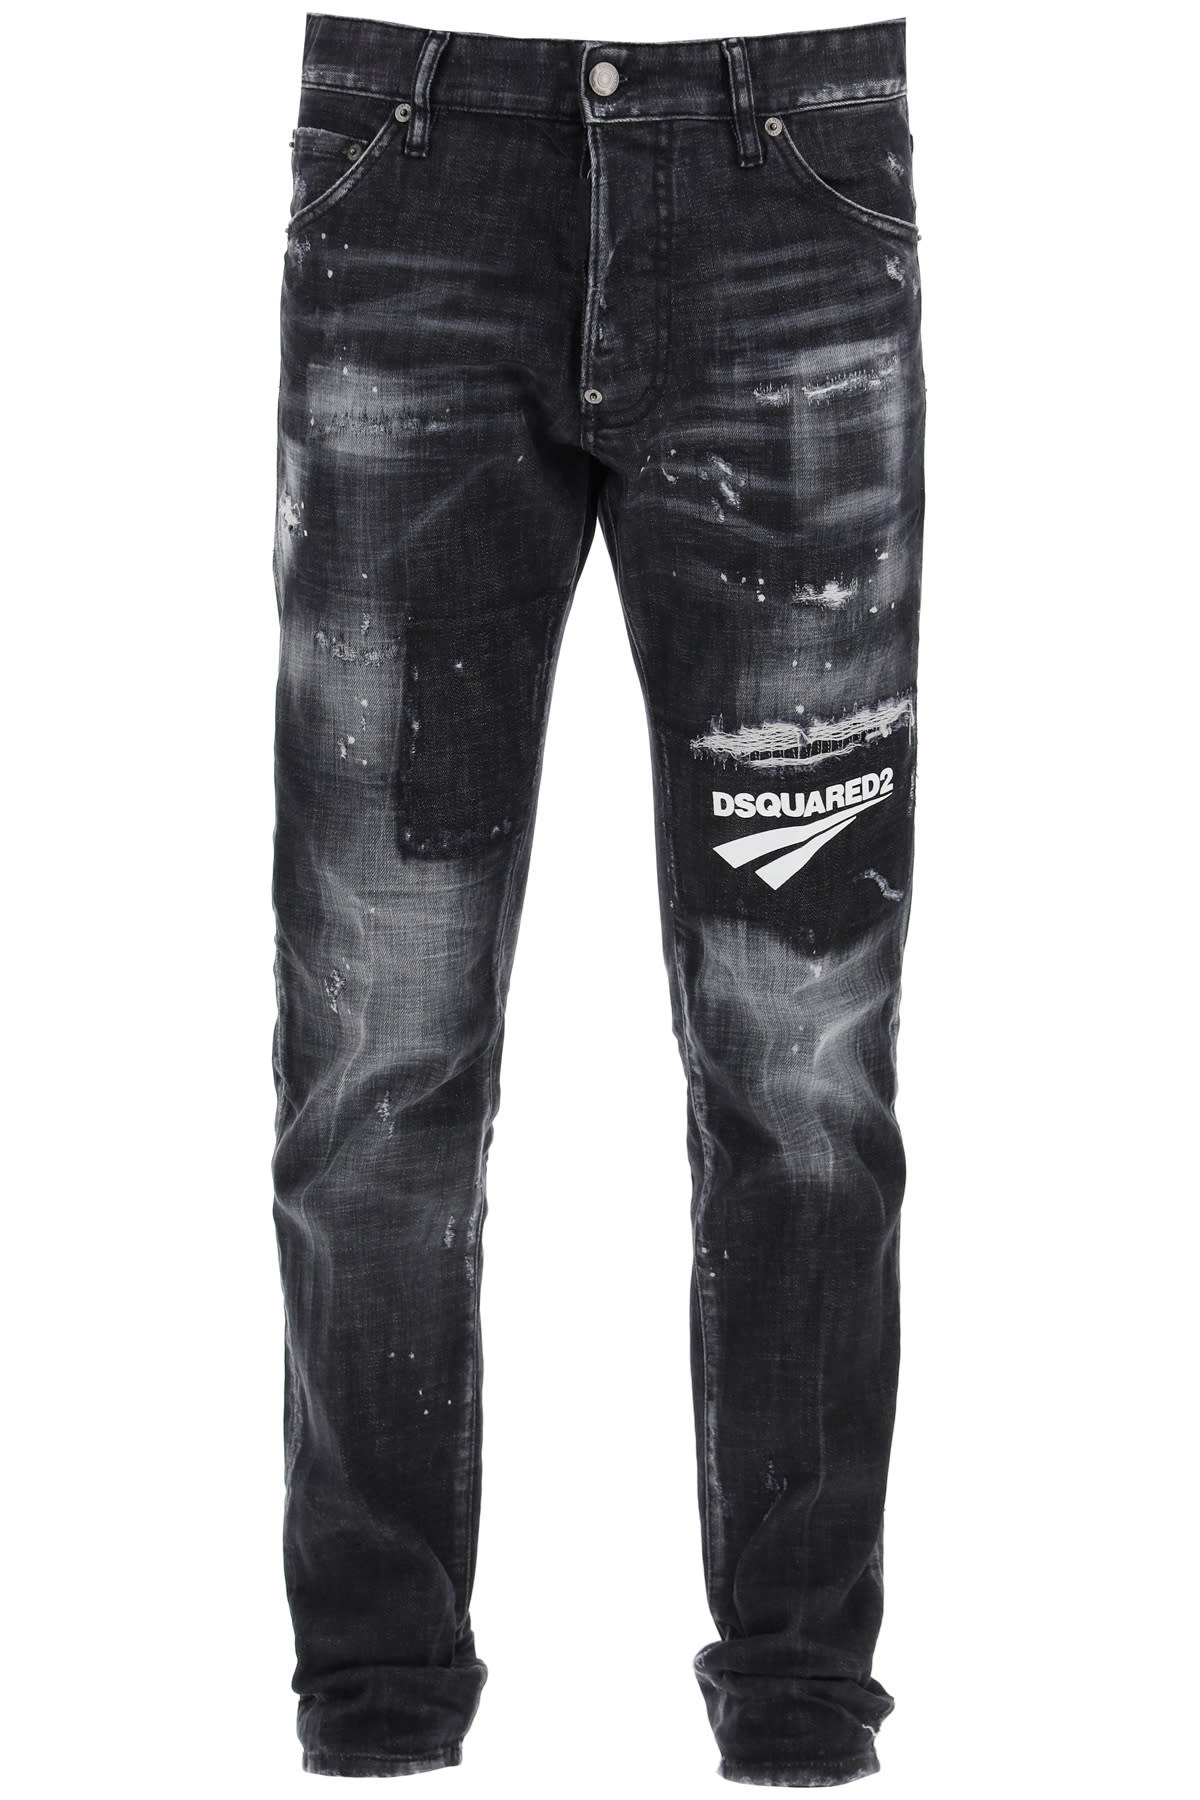 Dsquared2 Cool Guy Jeans Logo